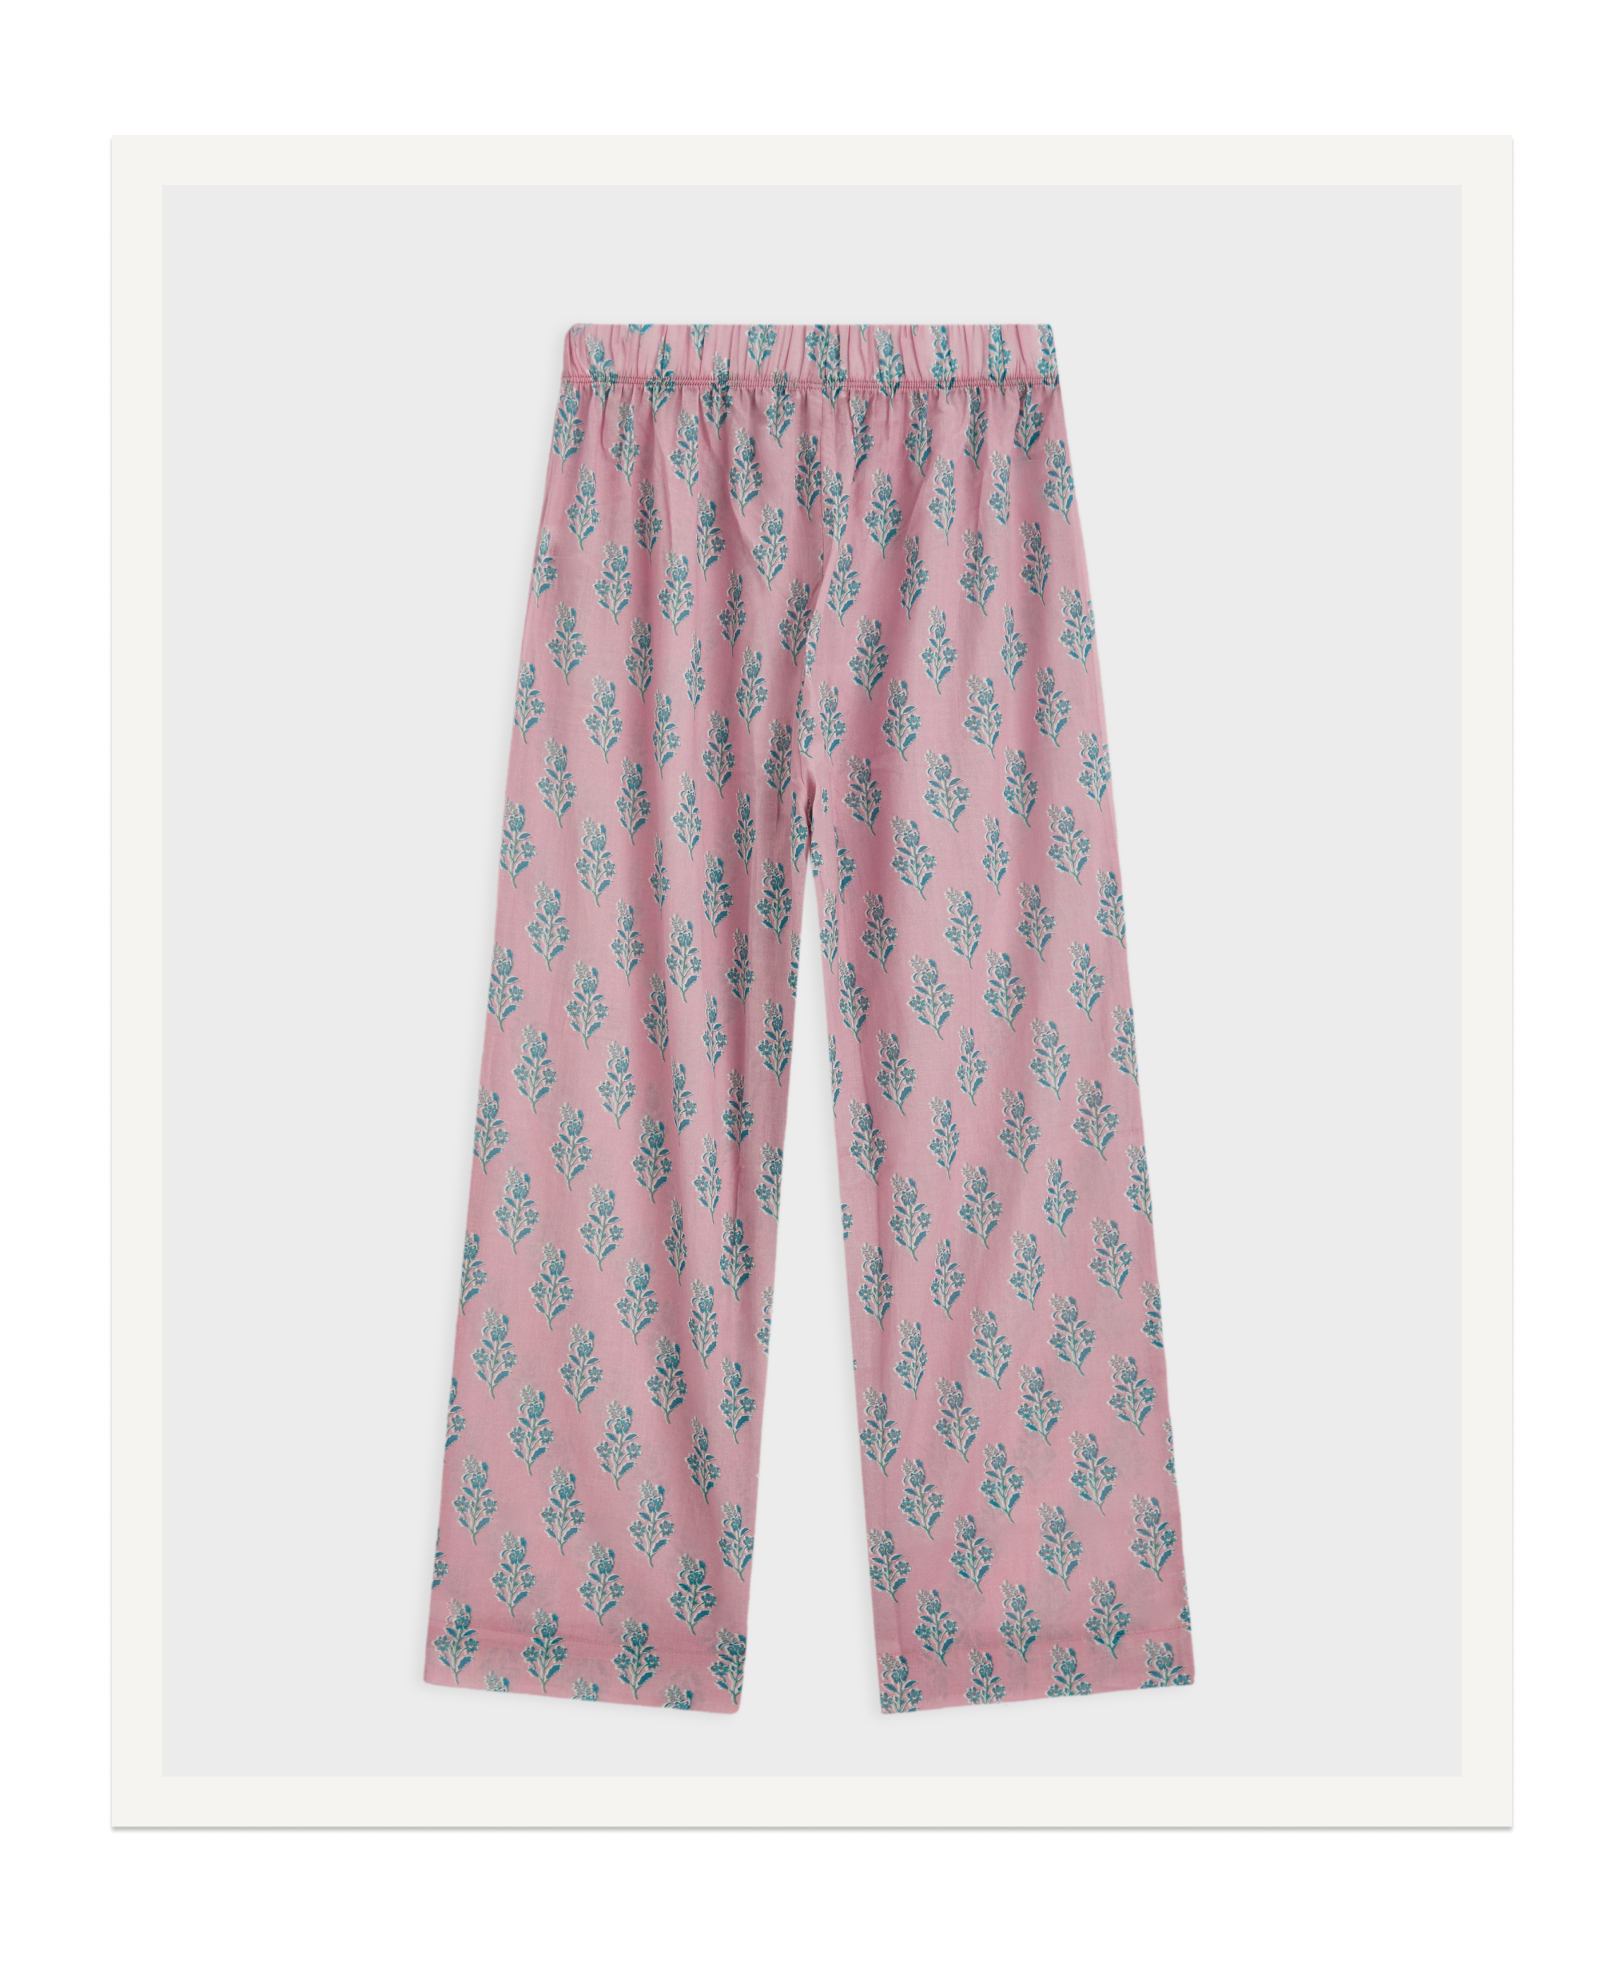 100% cotton printed trousers